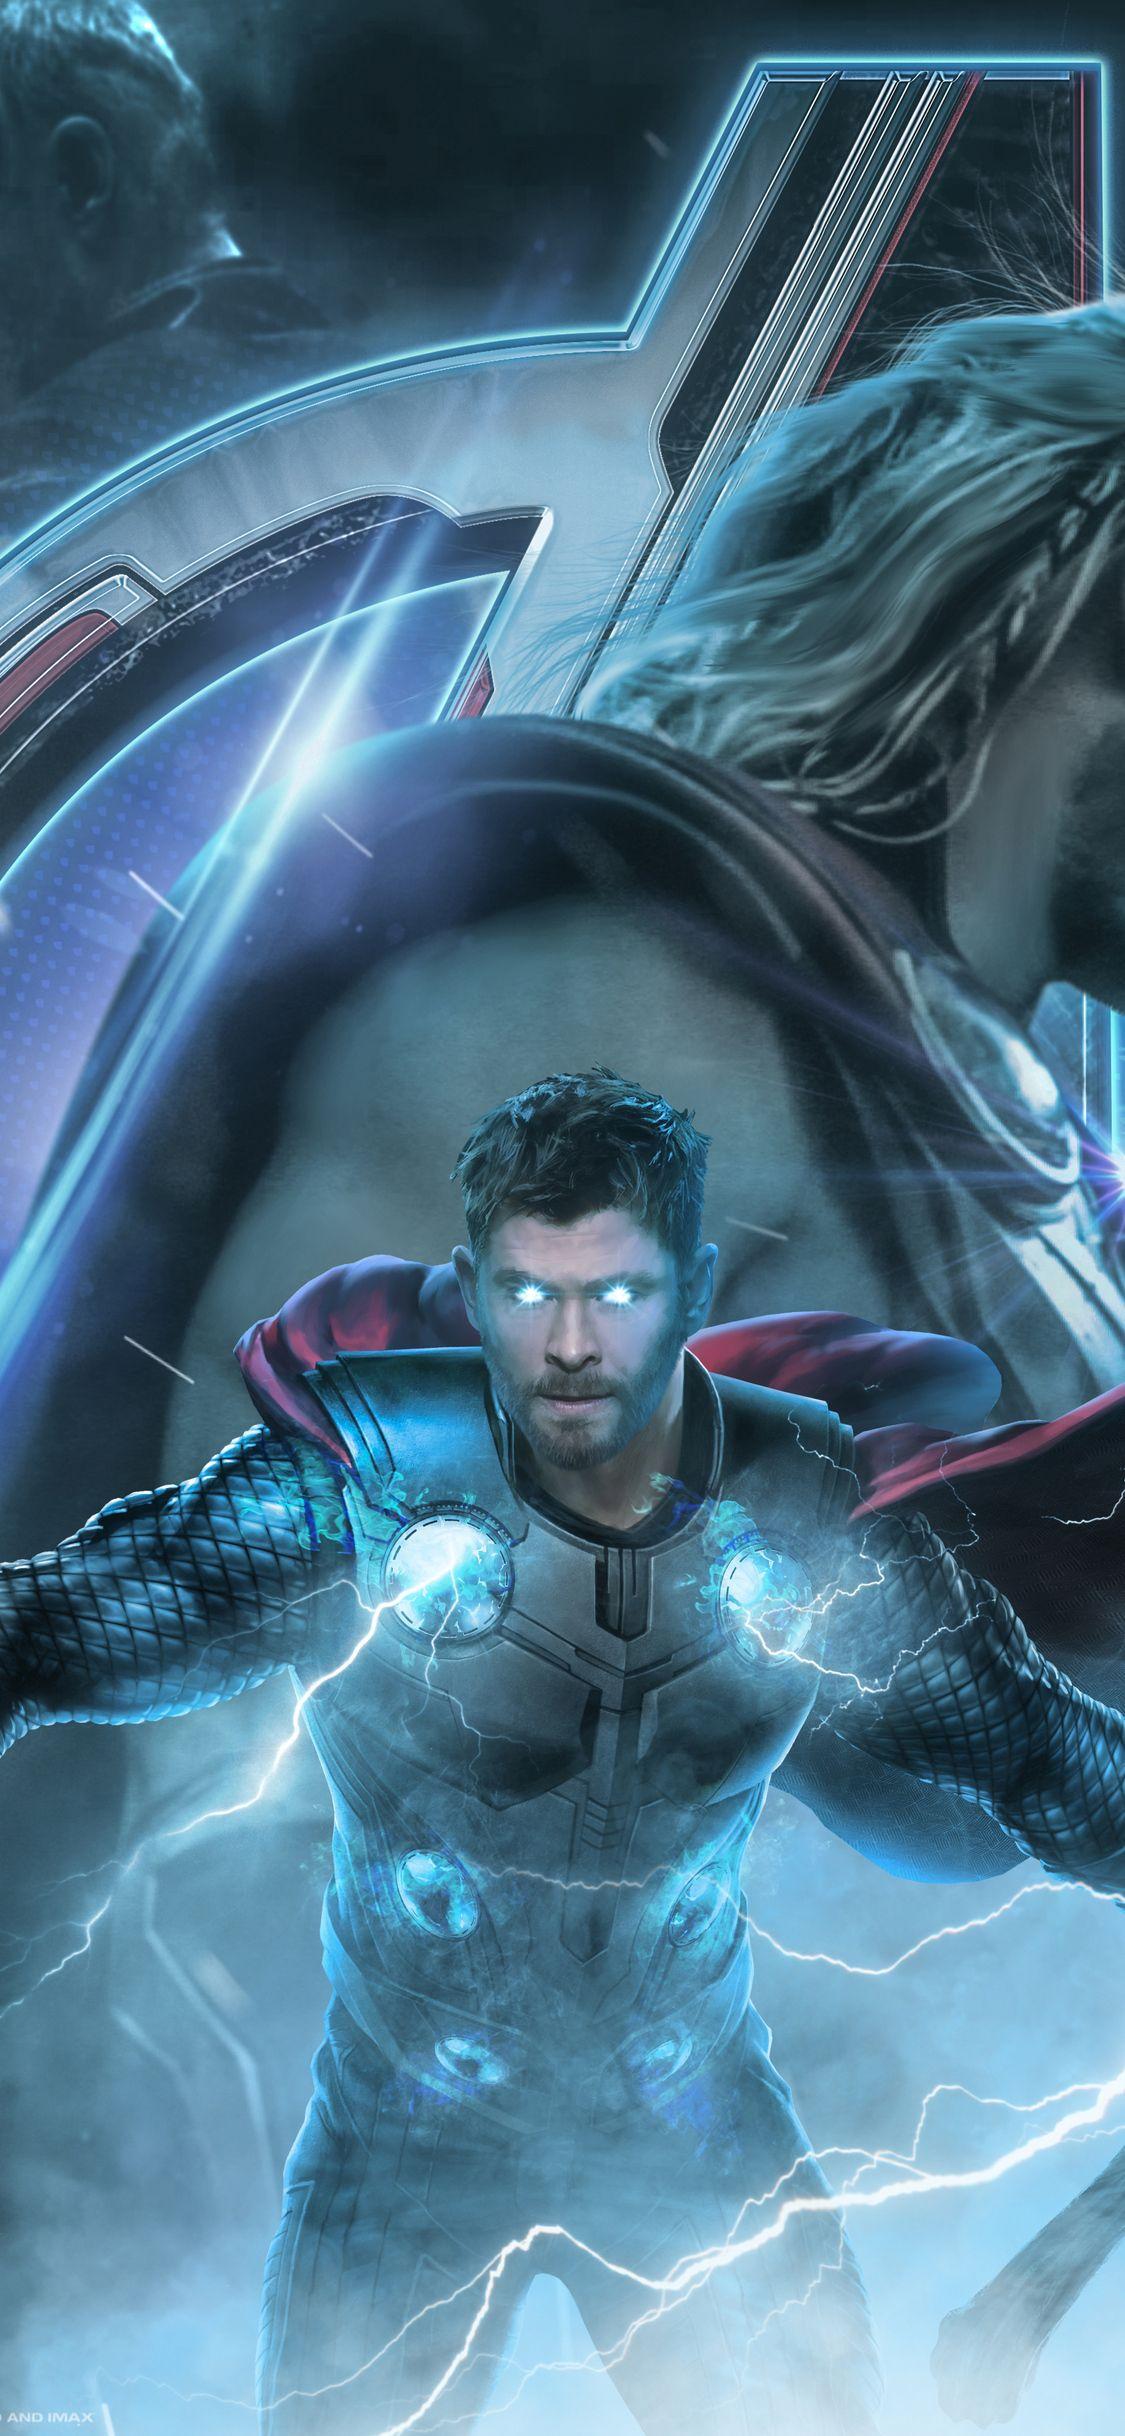 17+] Thor 2019 Wallpapers